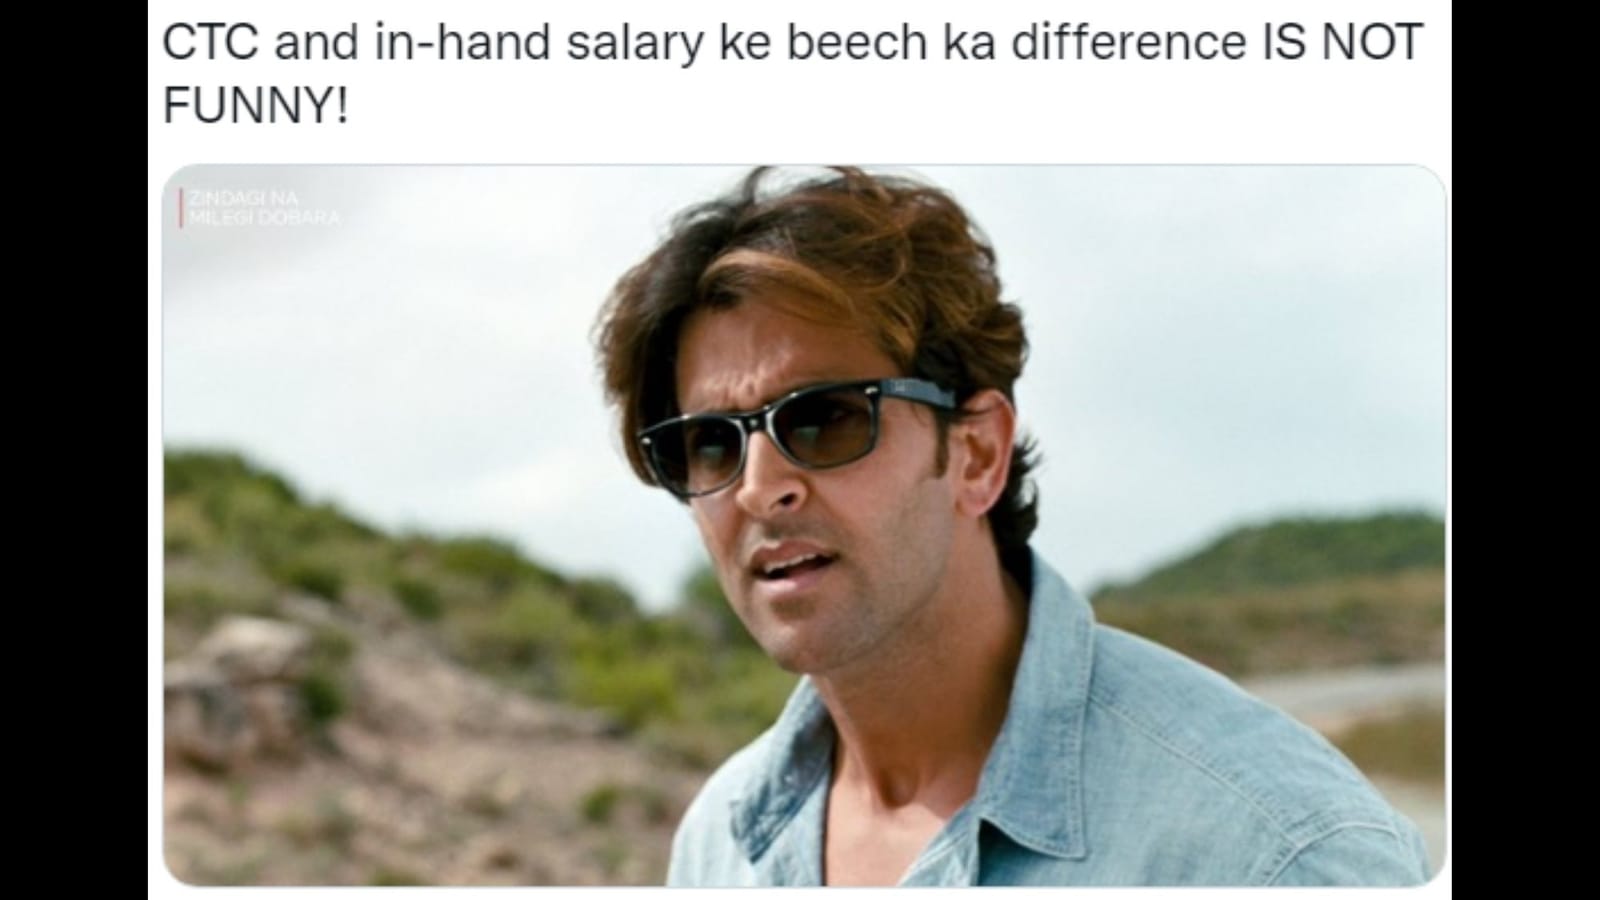 Hrithik Roshan's 'not funny' line from ZNMD sparks hilarious Twitter trend  | Trending - Hindustan Times